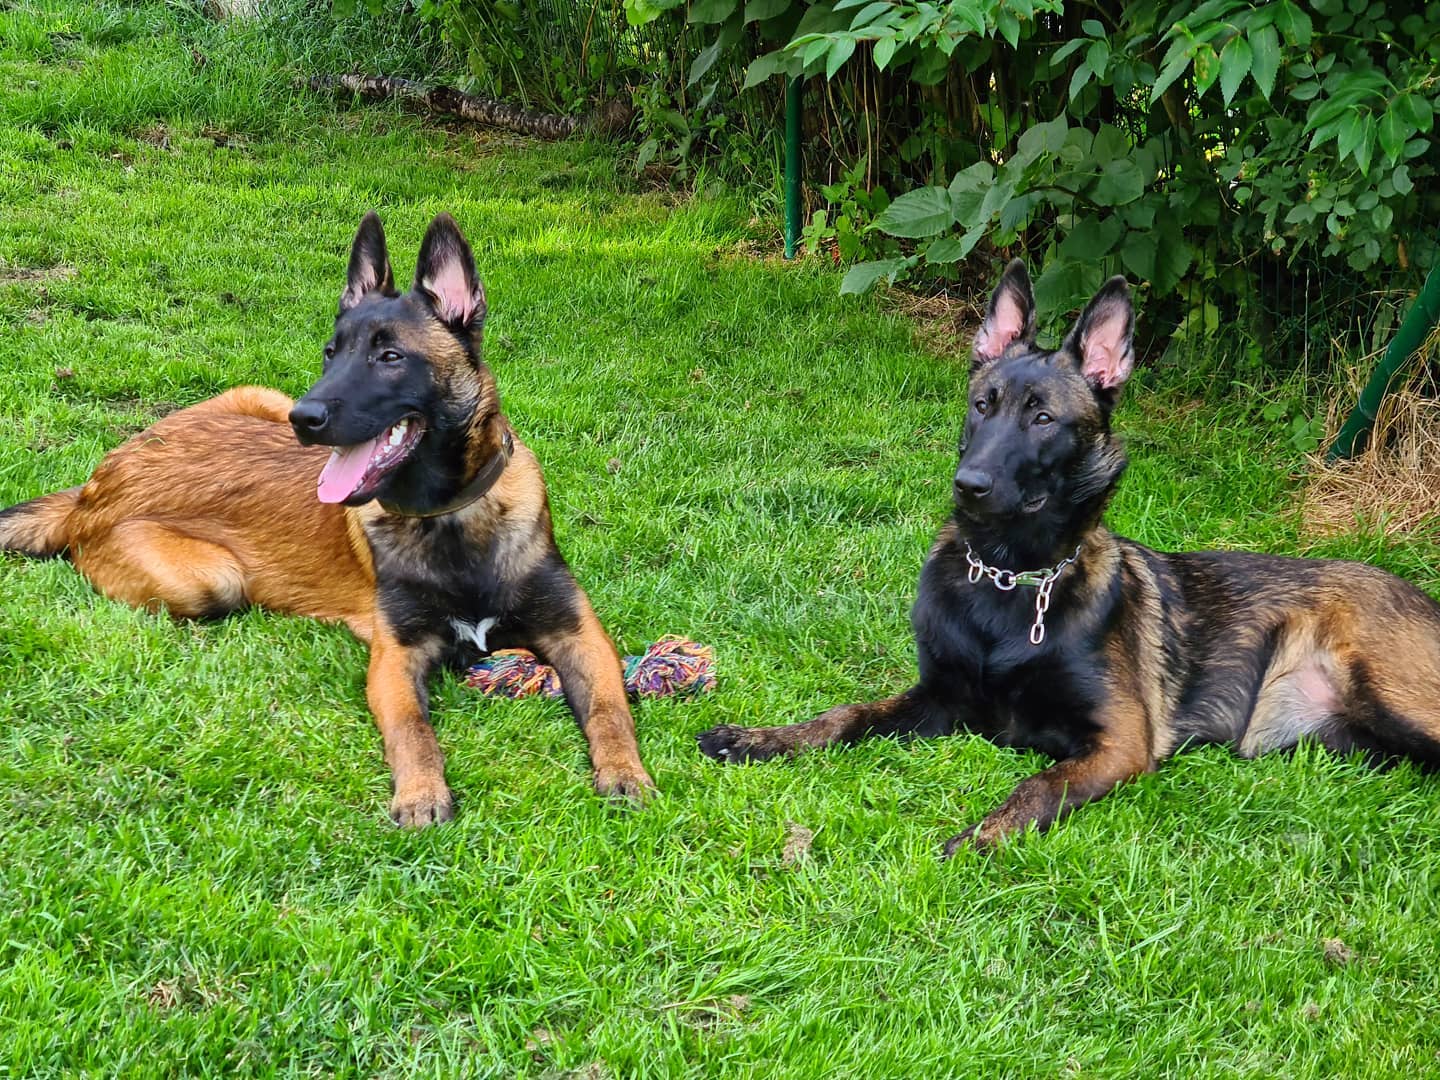 Brother & Sister 💪🤩
Le Merdock & Lolly

#throwback #siblings #malinois #malinoisofinstagram #malinoisworld #workingmalinois #workingdogs #workingdogsofinstagram #k9dogs